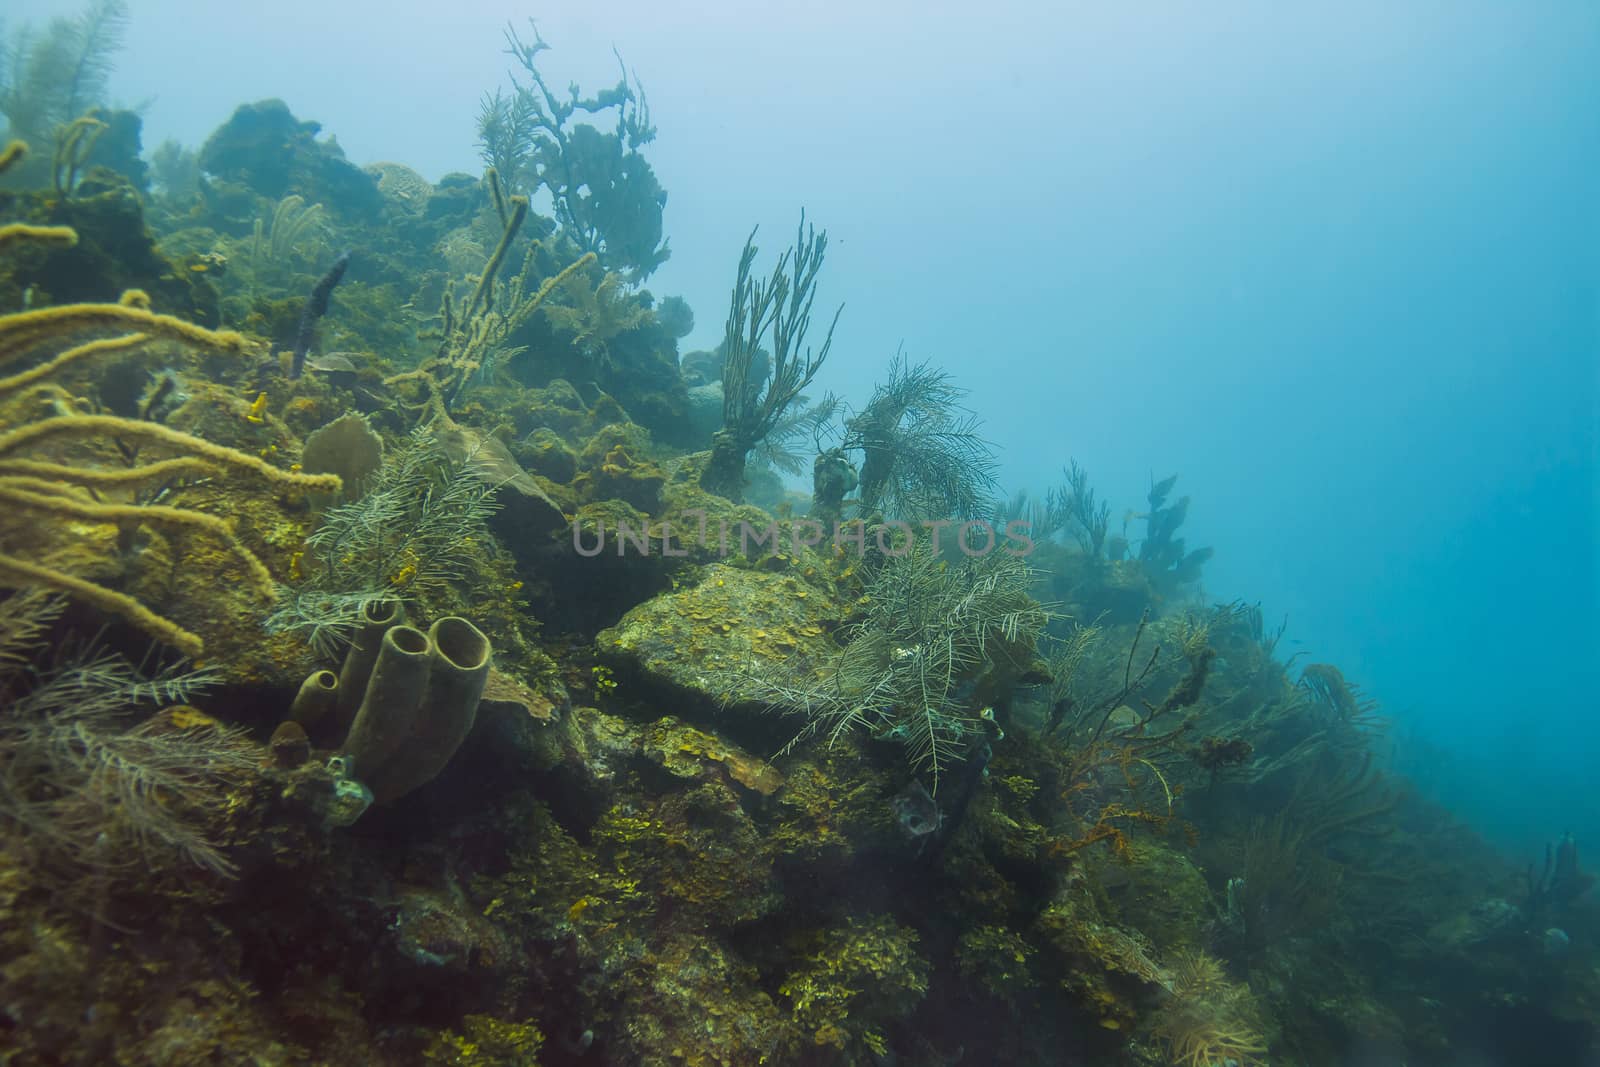 Large Caribbean coral reef filled with multiple species of coral and sponges